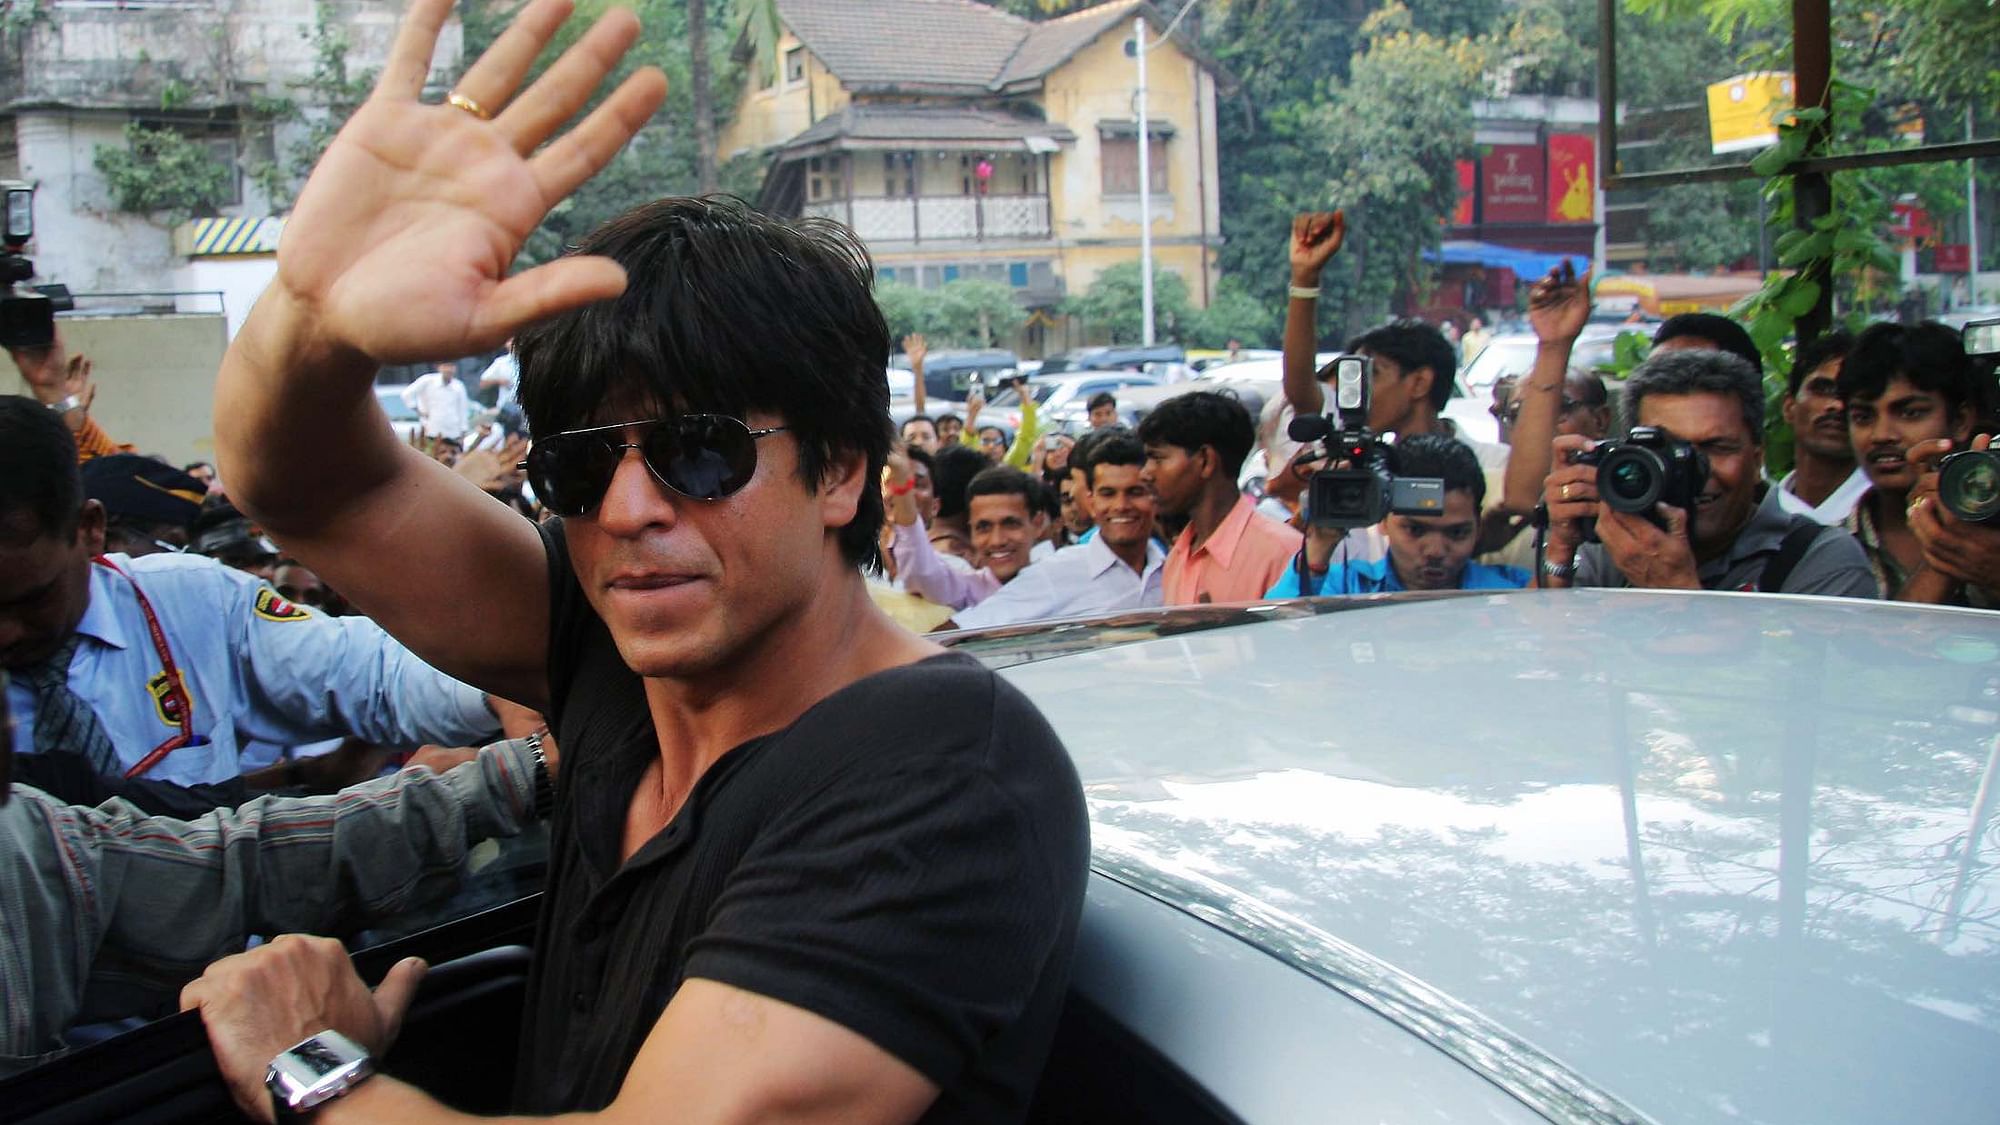 Shah Rukh Khan waves to fans outside this house (Photo: Reuters)